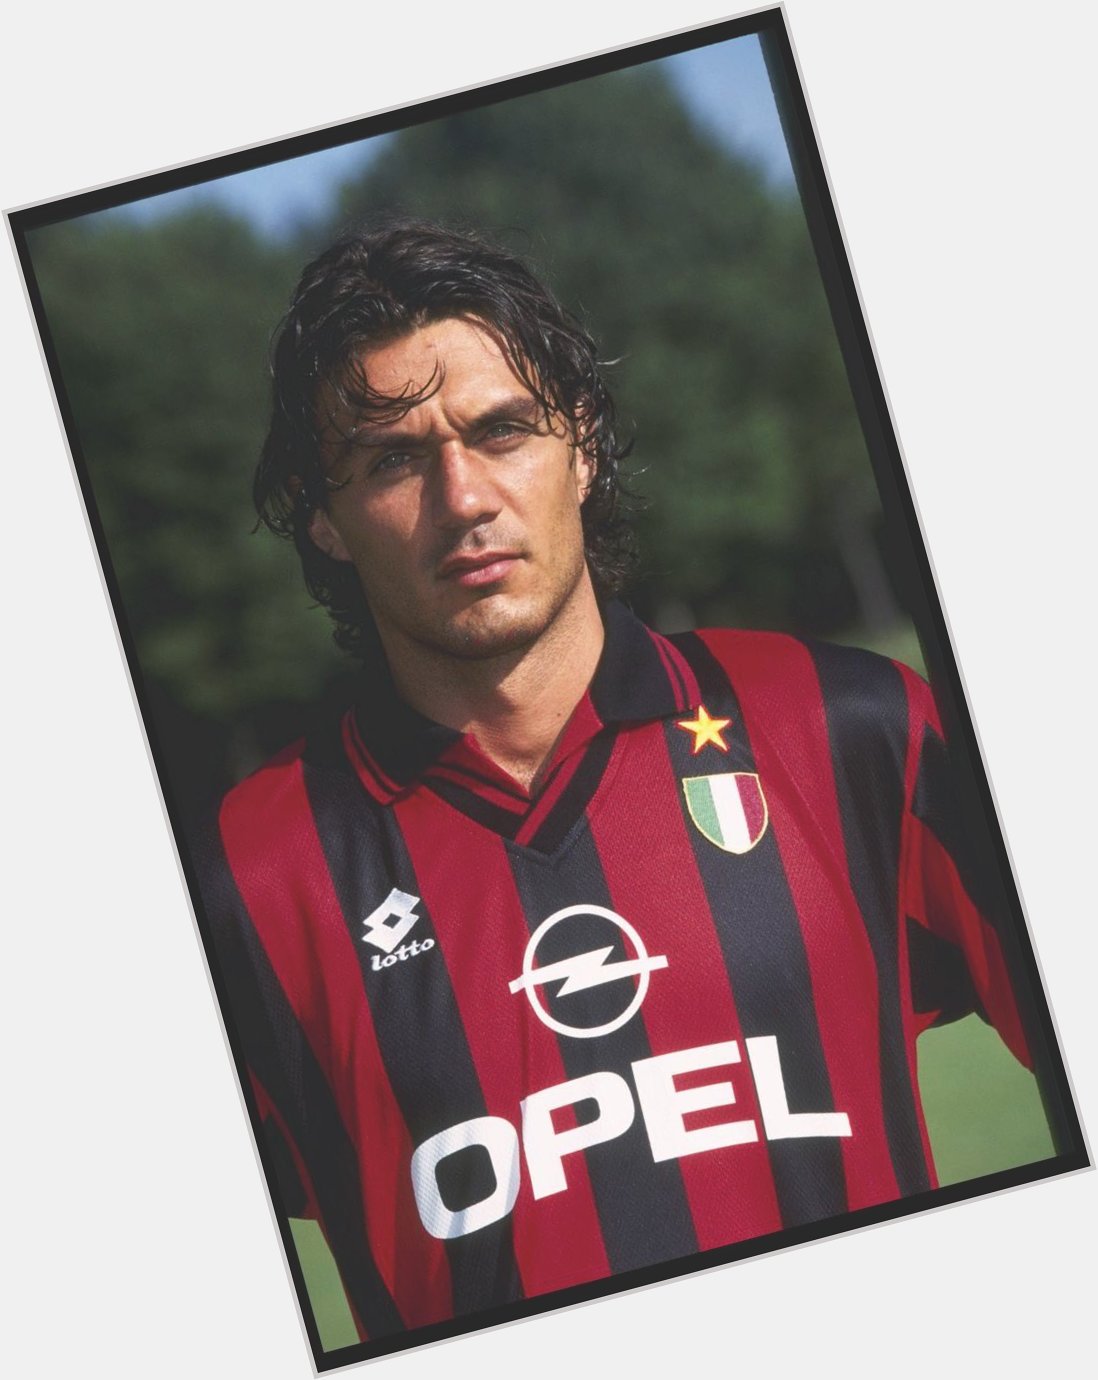 Happy birthday, Paolo Maldini.
The greatest defender to have walked on this planet.  